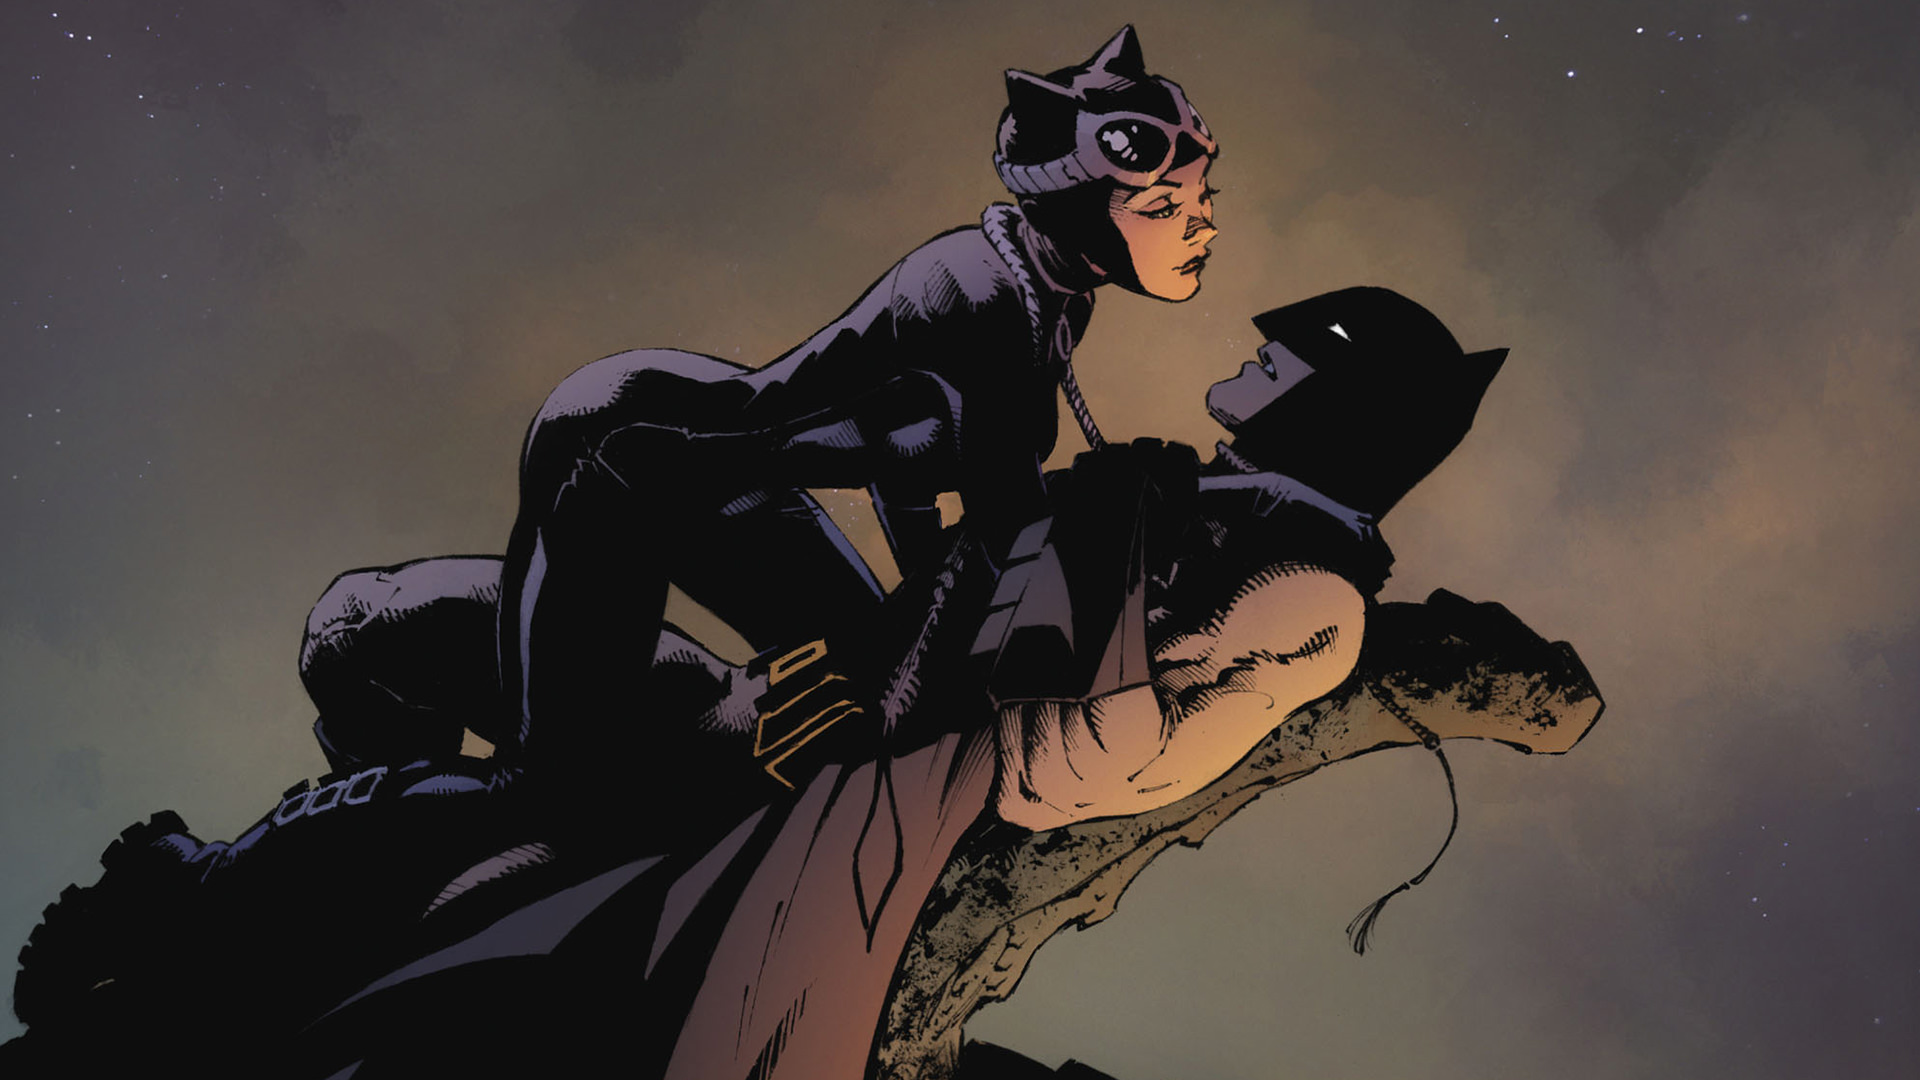 catwoman has batman all tied up.